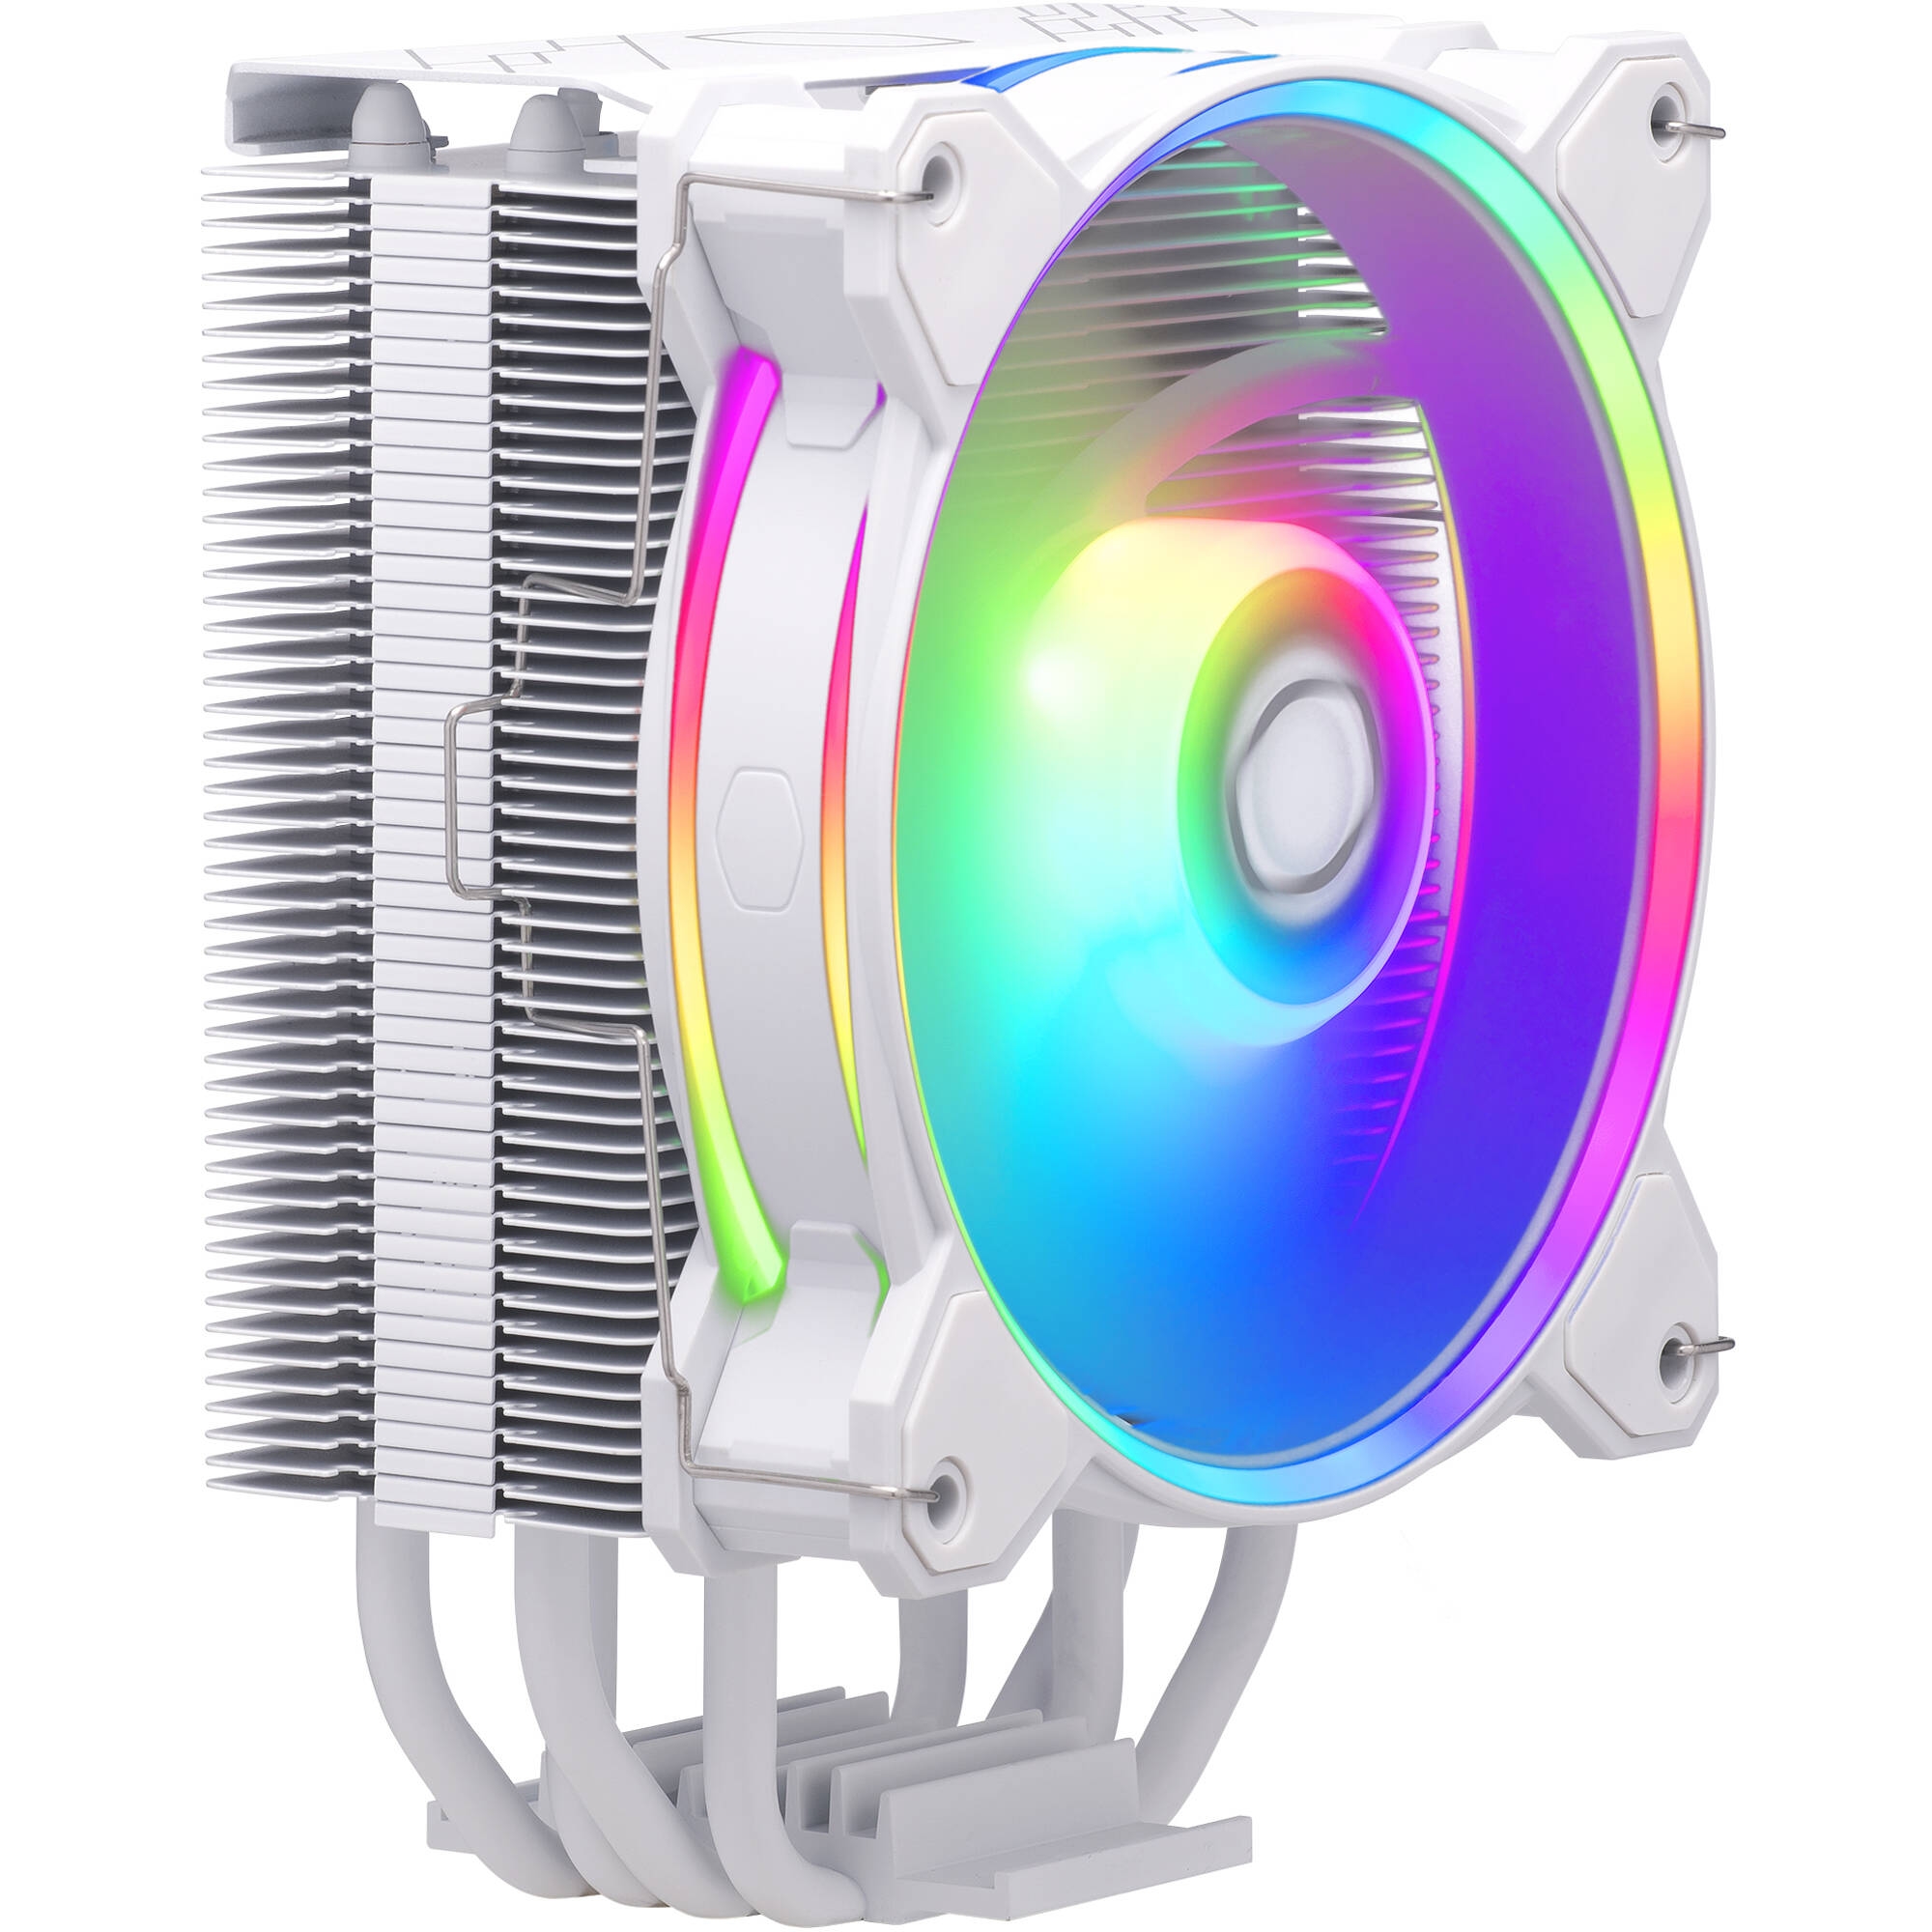 CPU COOLER COOLERMASTER HYPER 212 HALO WHITE EDITION